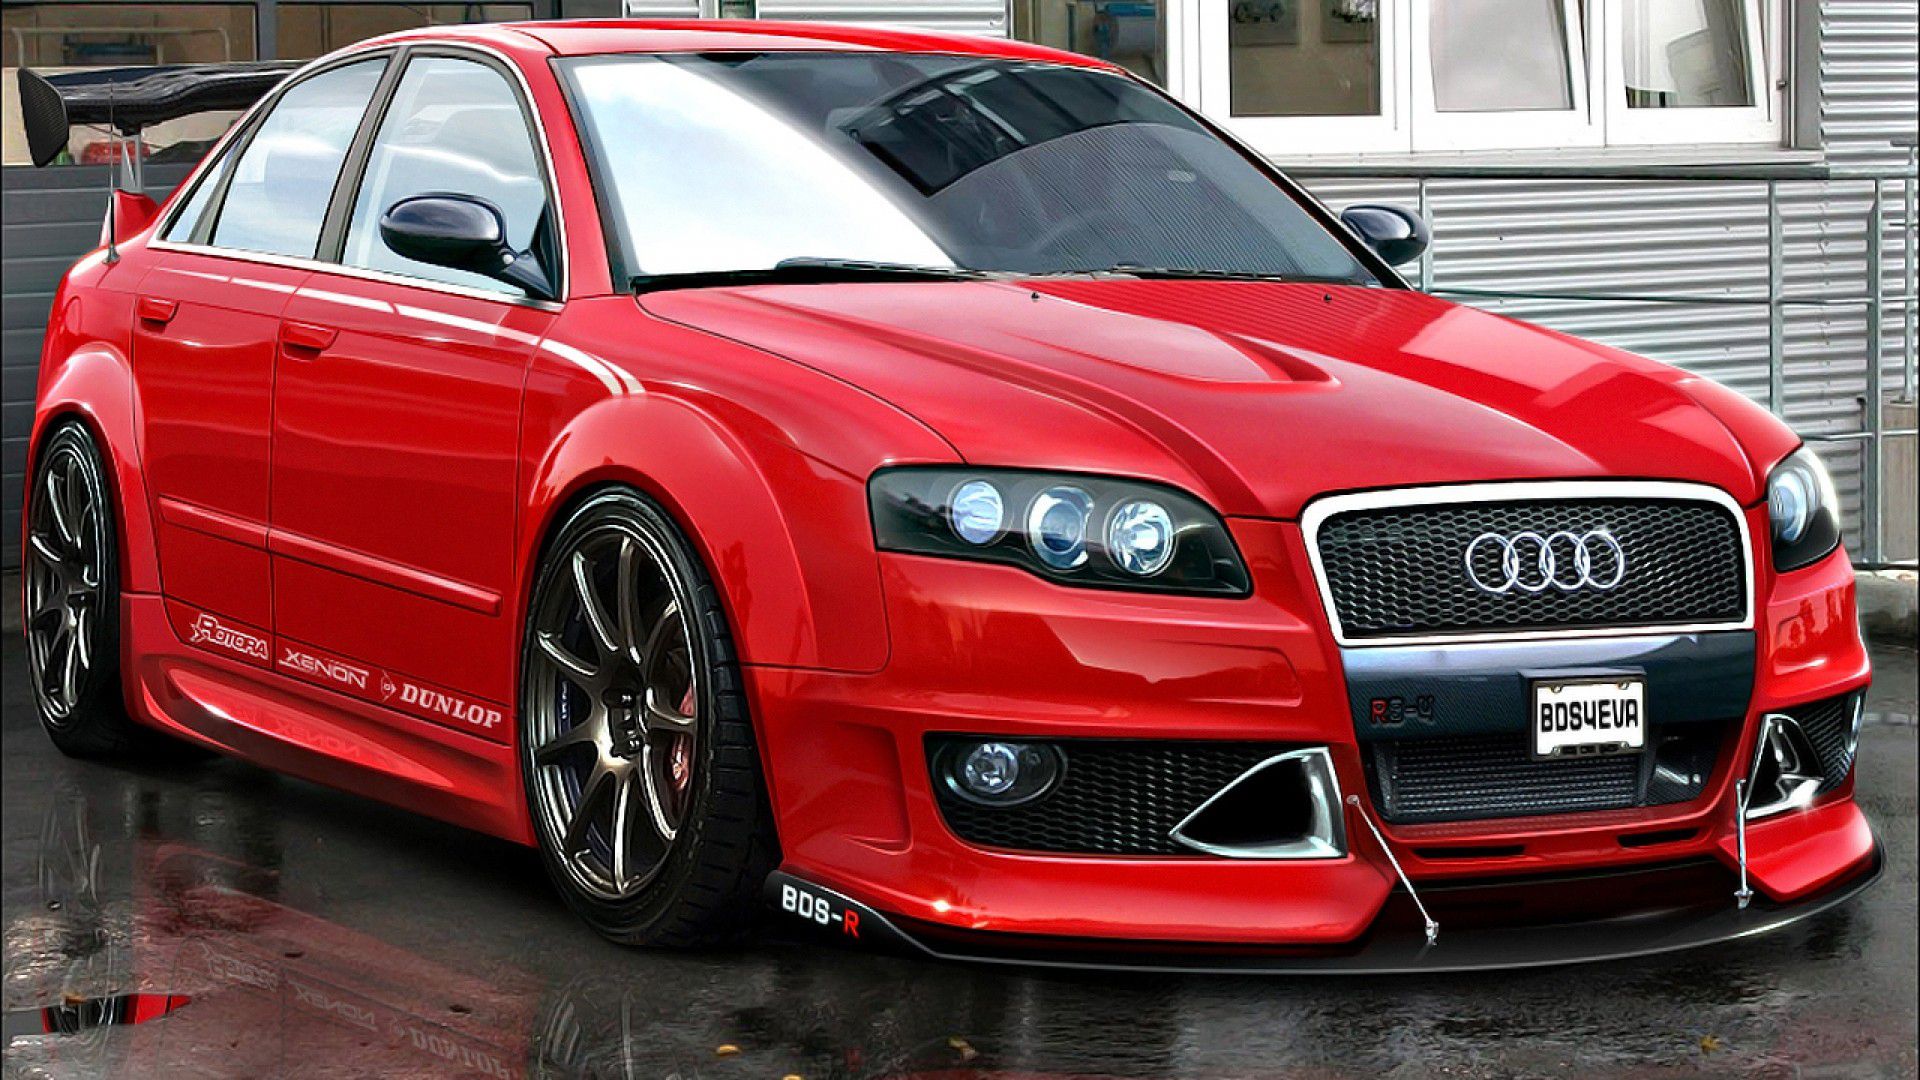 Audi RS 4 (2006 to 2008)